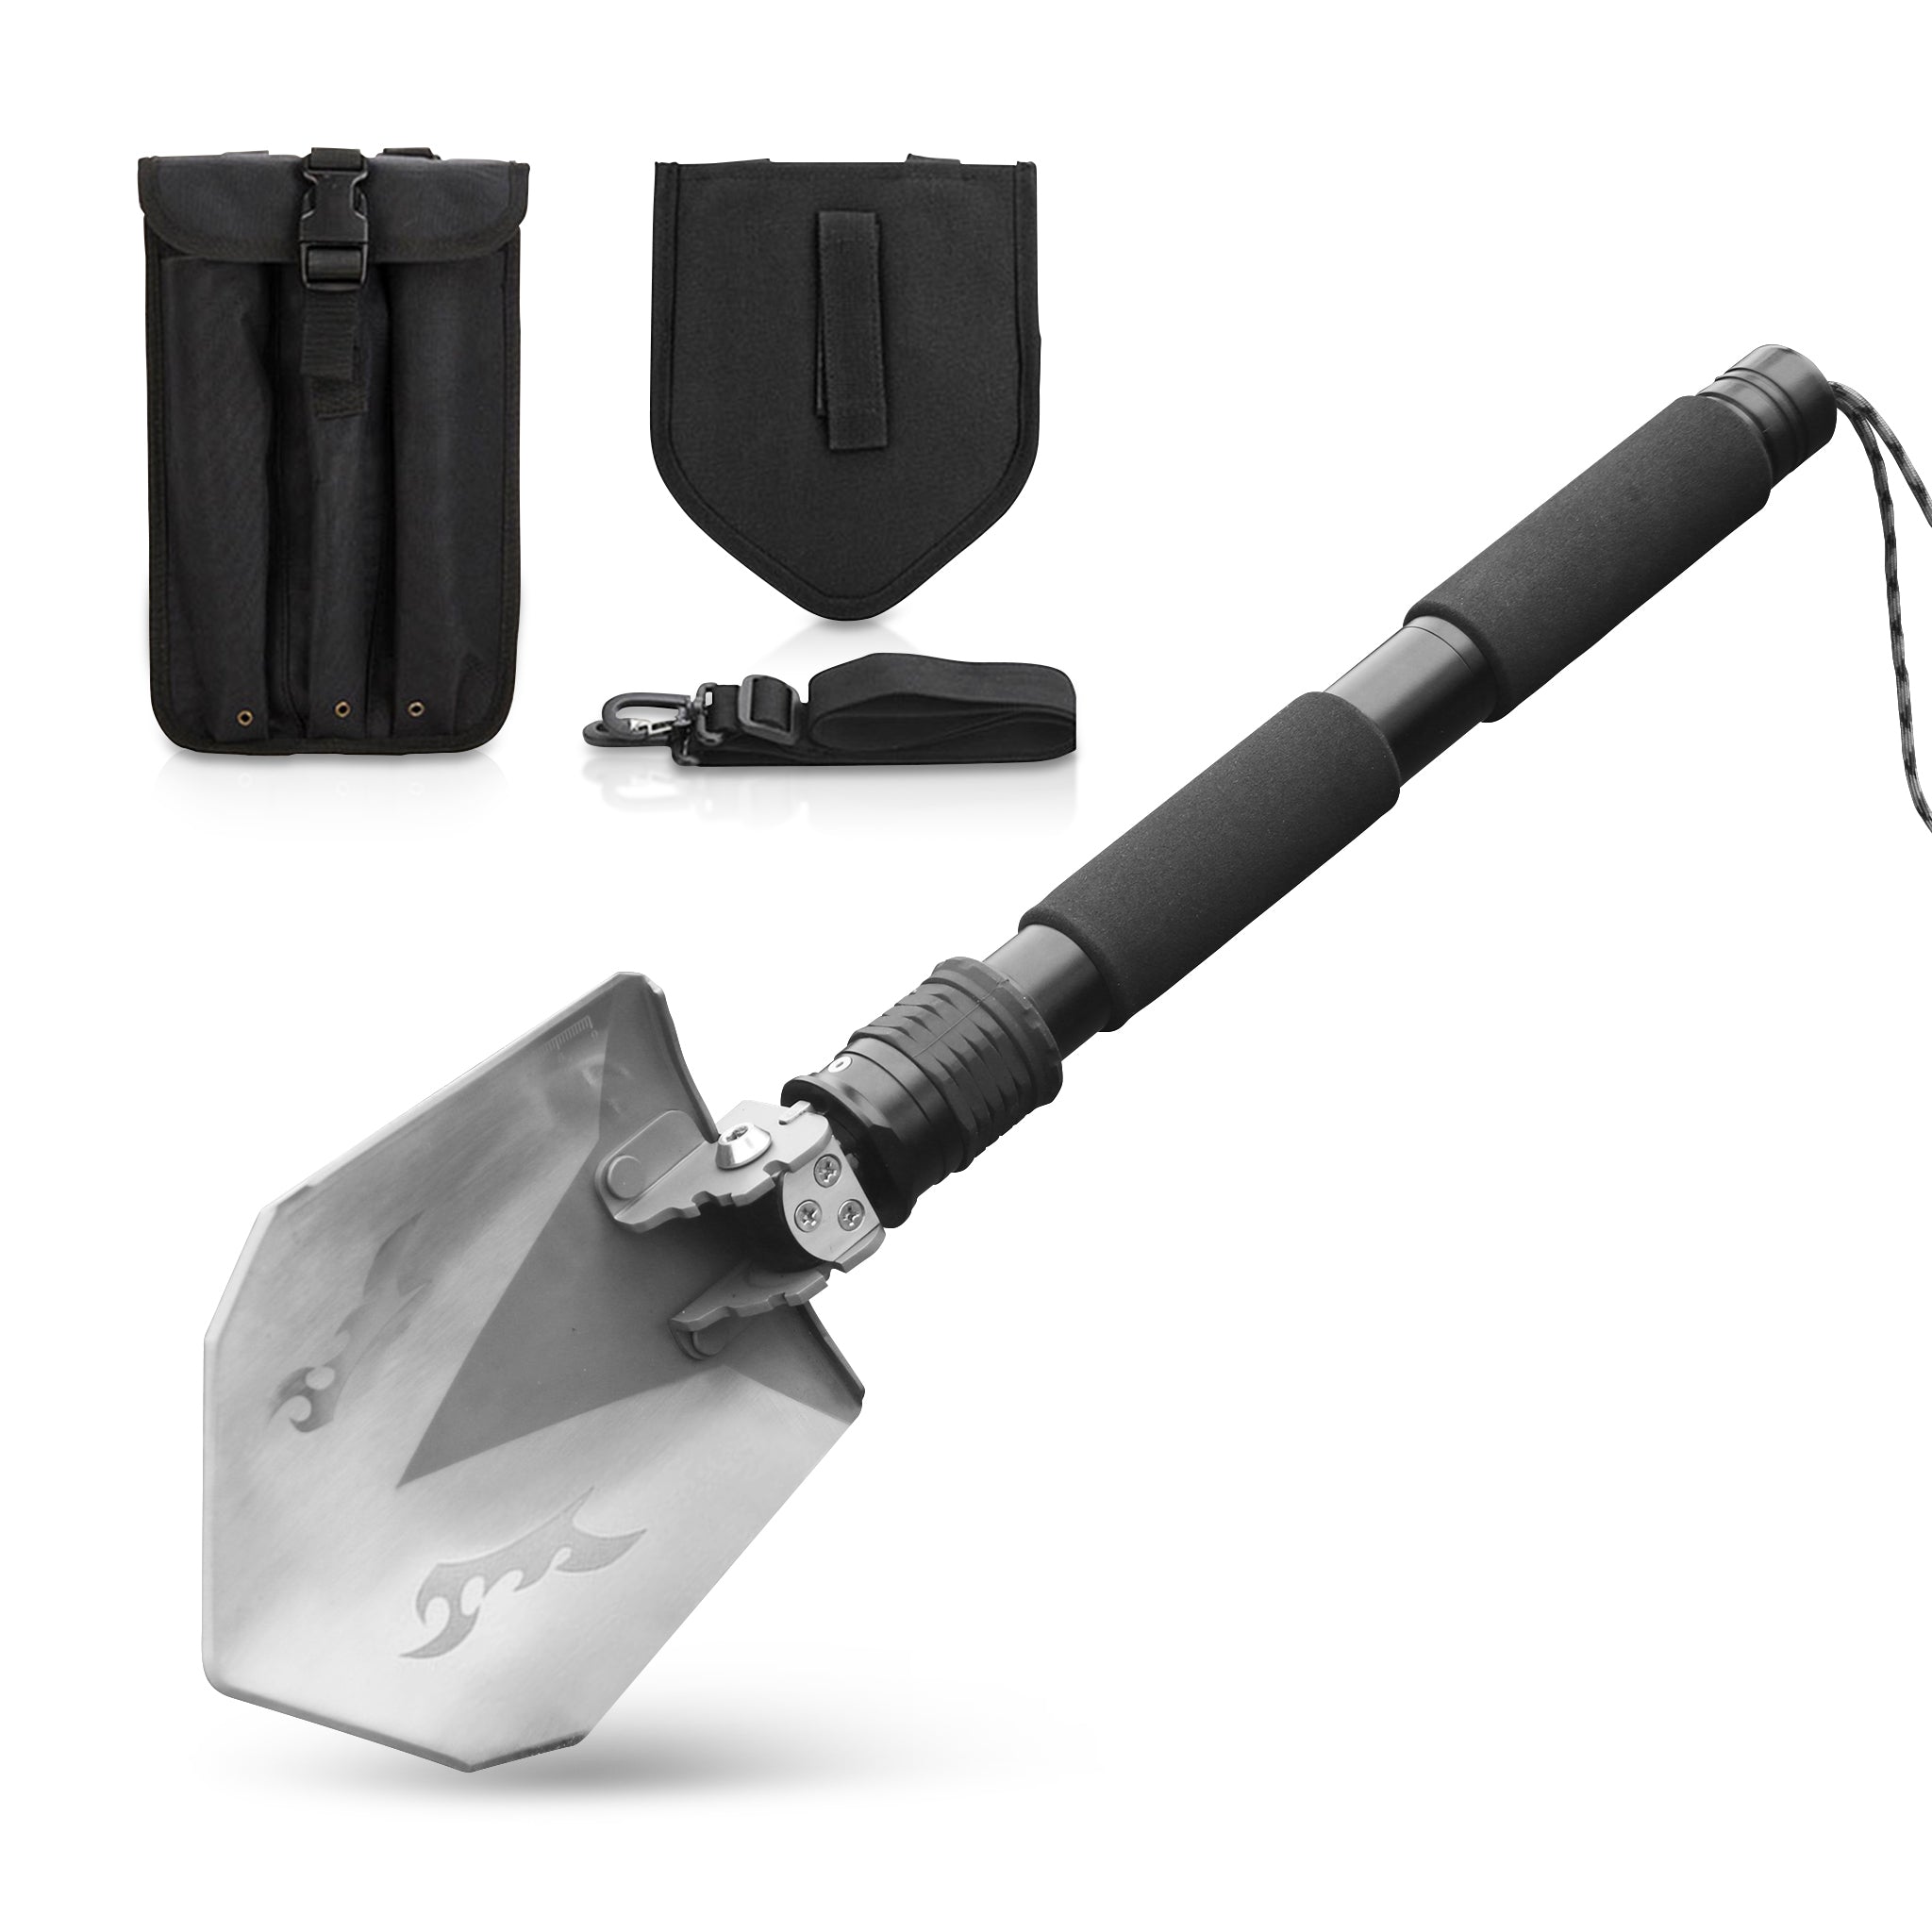 FiveJoy Military Folding Shovel Multitool (RS) to Keep in Vehicle for Emergency